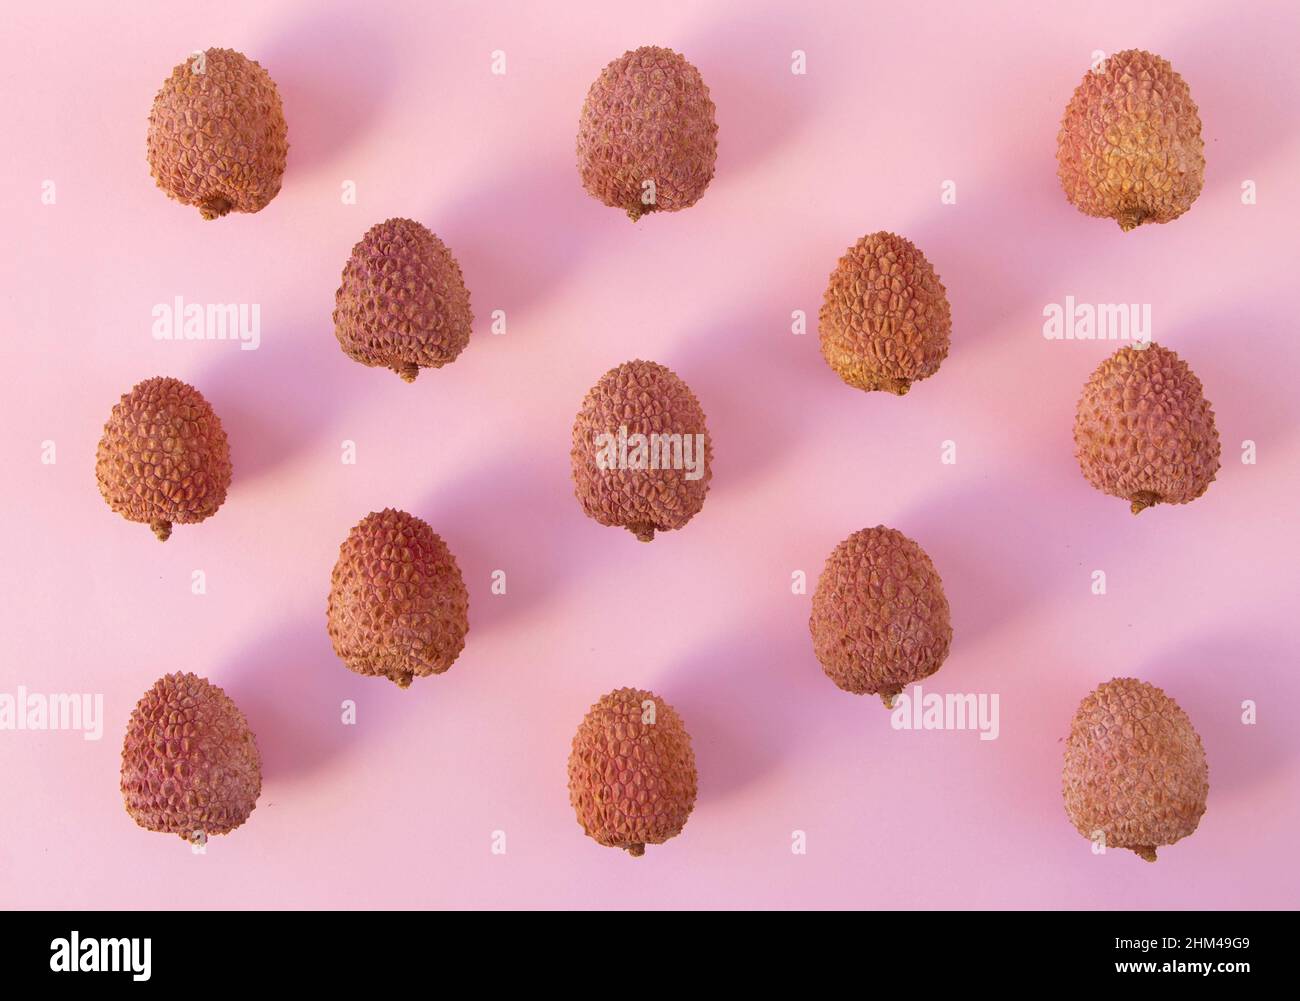 Lychee fruits pattern on the pink background. Litchi chinensis Stock Photo